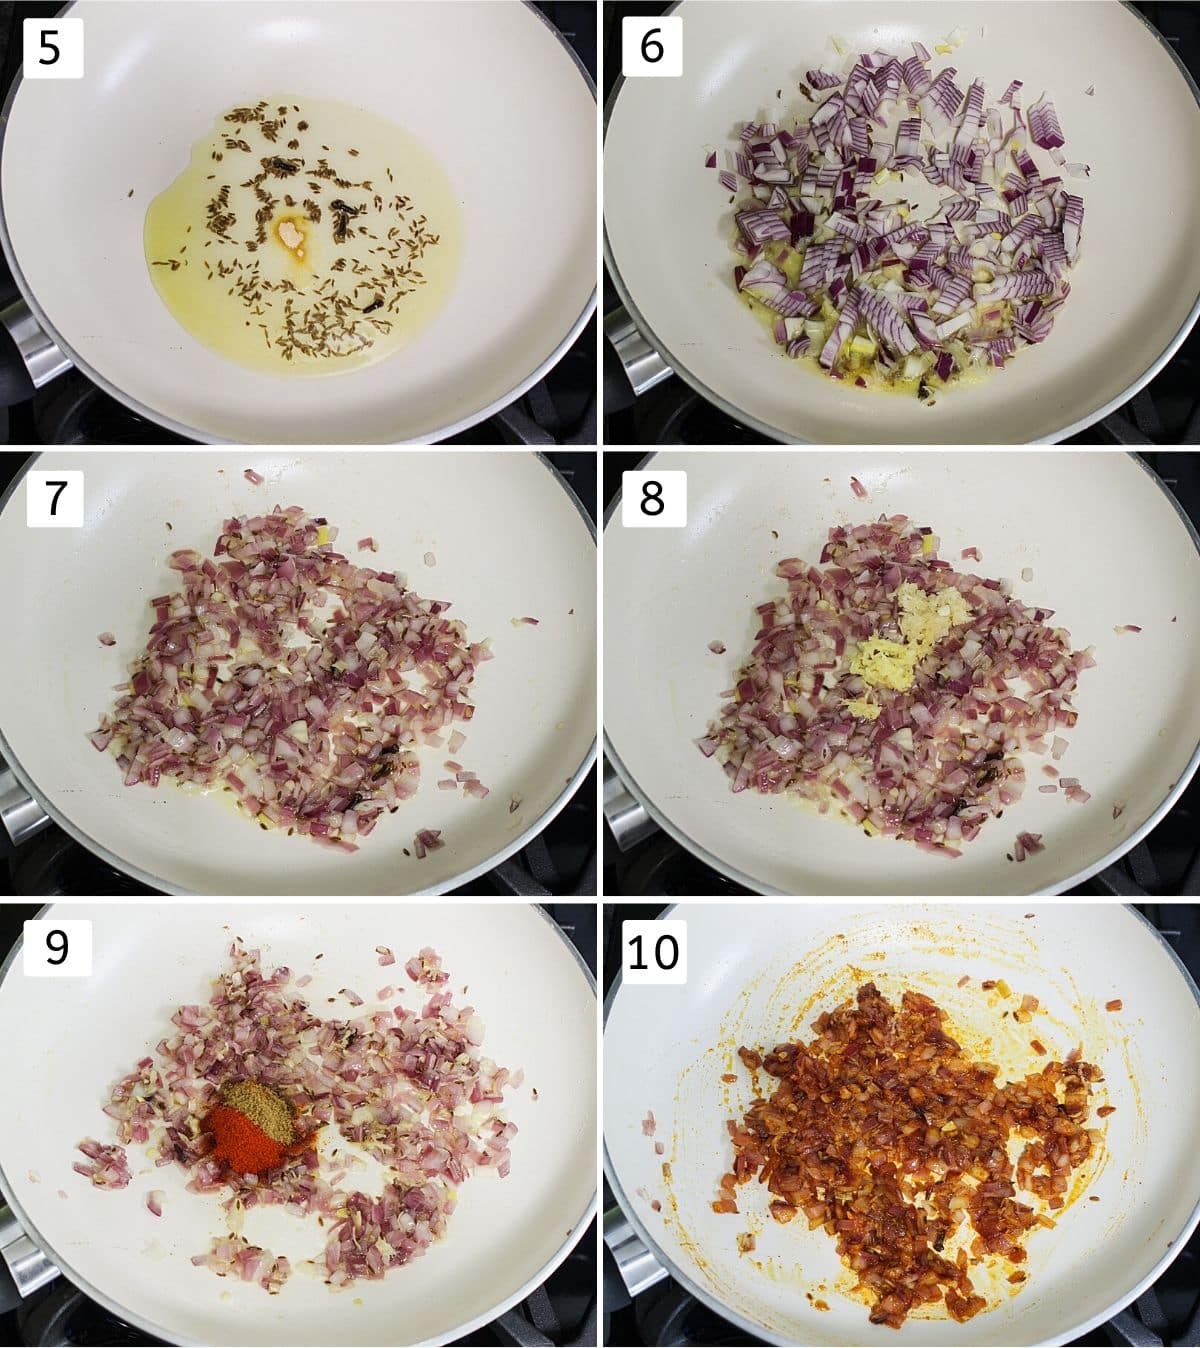 Collage of 6 images showing tempering spices, cooking onion, ginger, garlic and mixing spices.